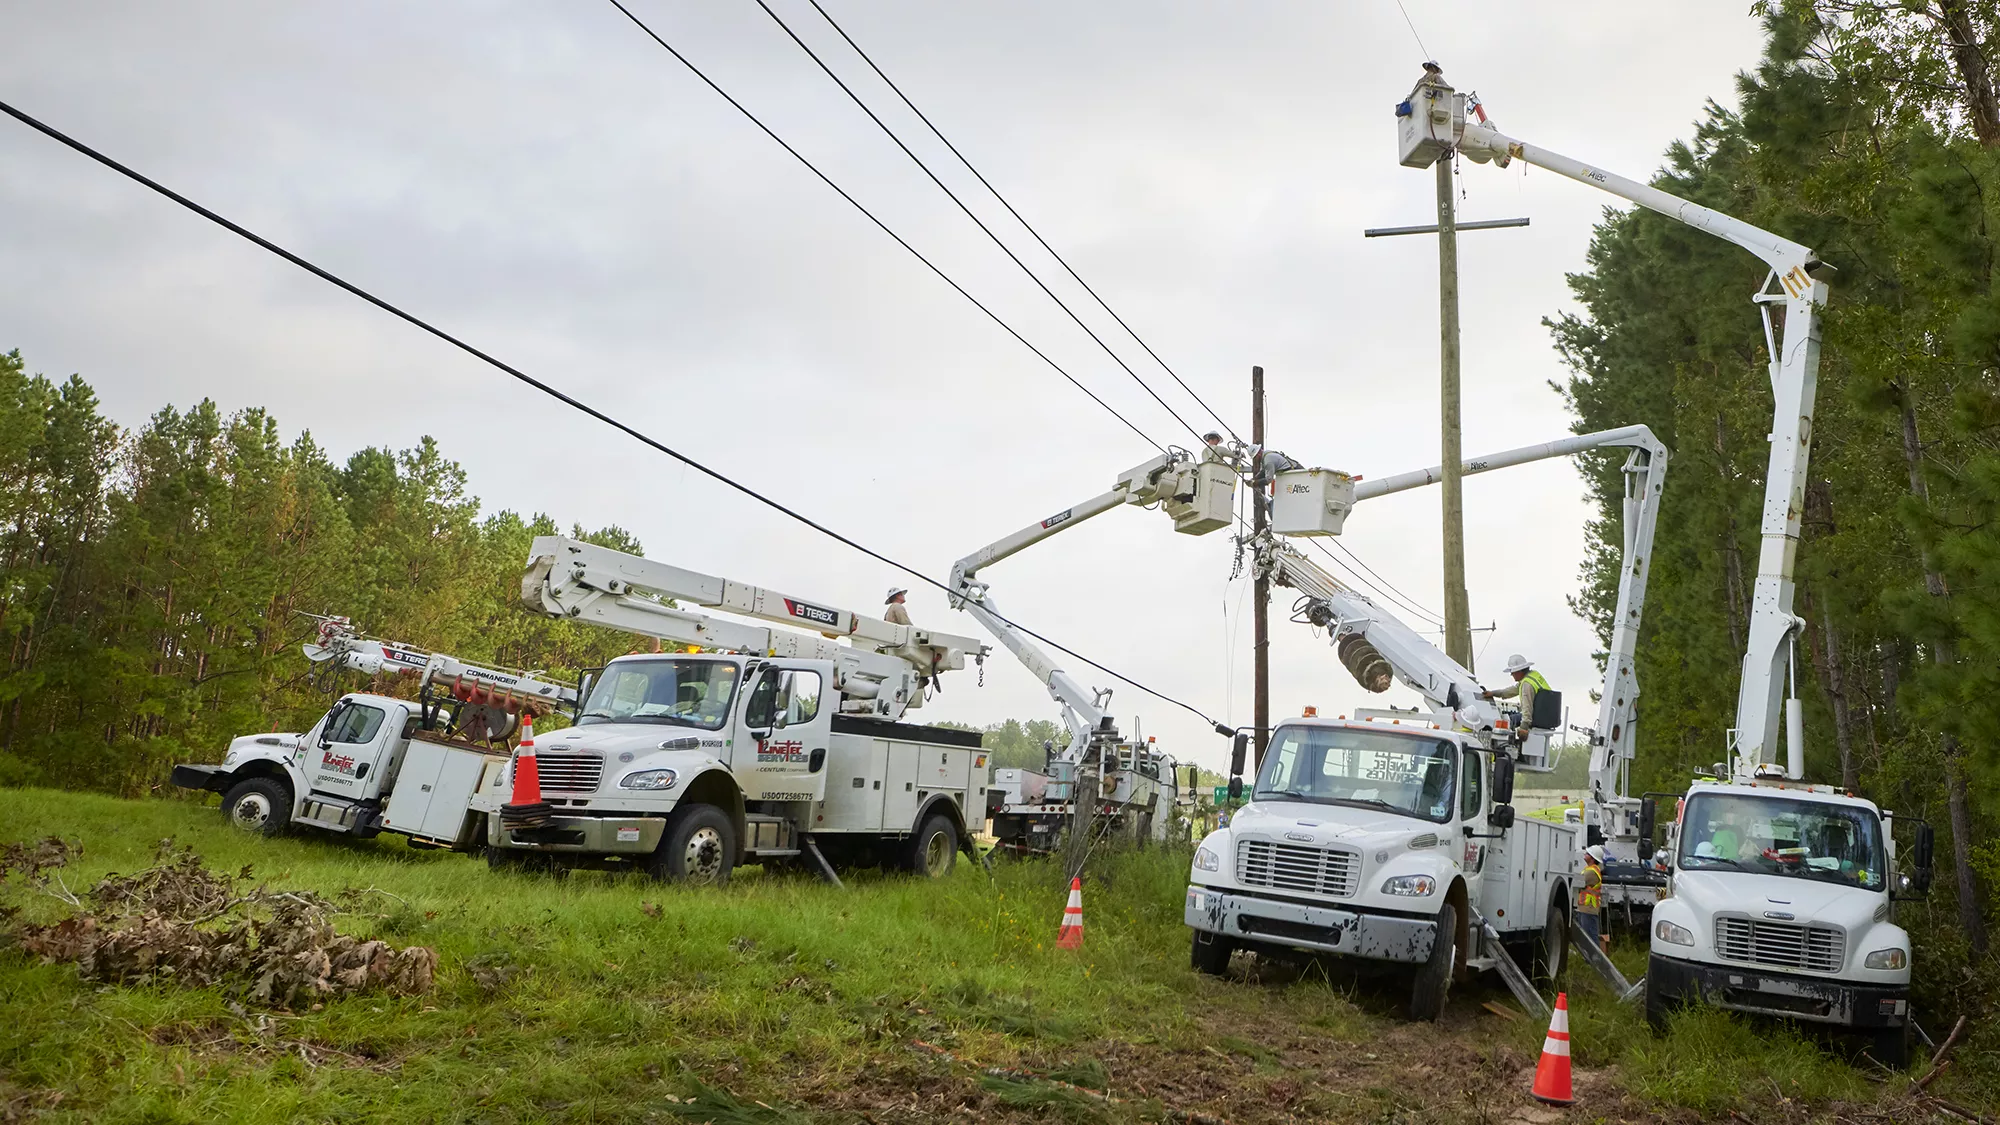 A Linetec team in trucks work on power lines.